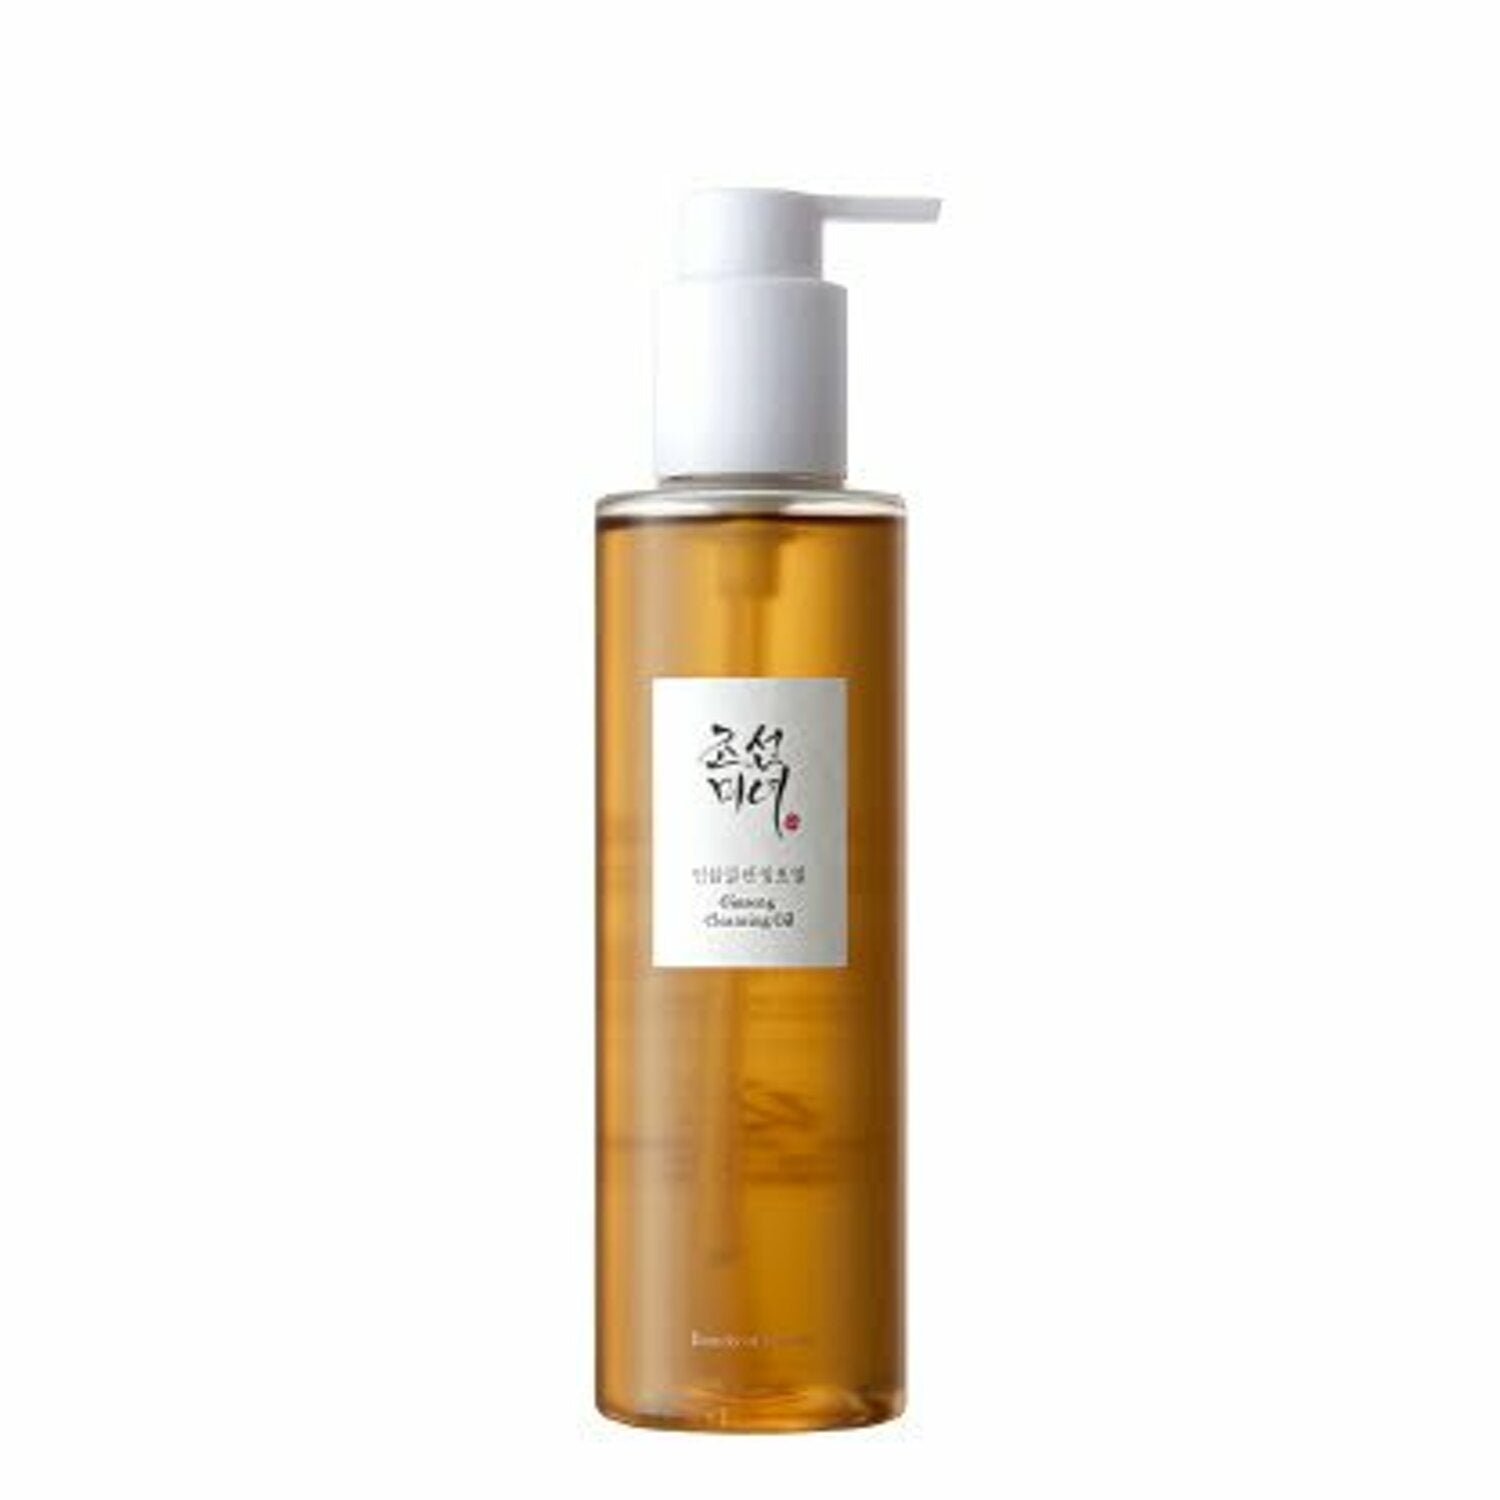 Beauty of Joseon - Ginseng Cleansing Oil 210mL